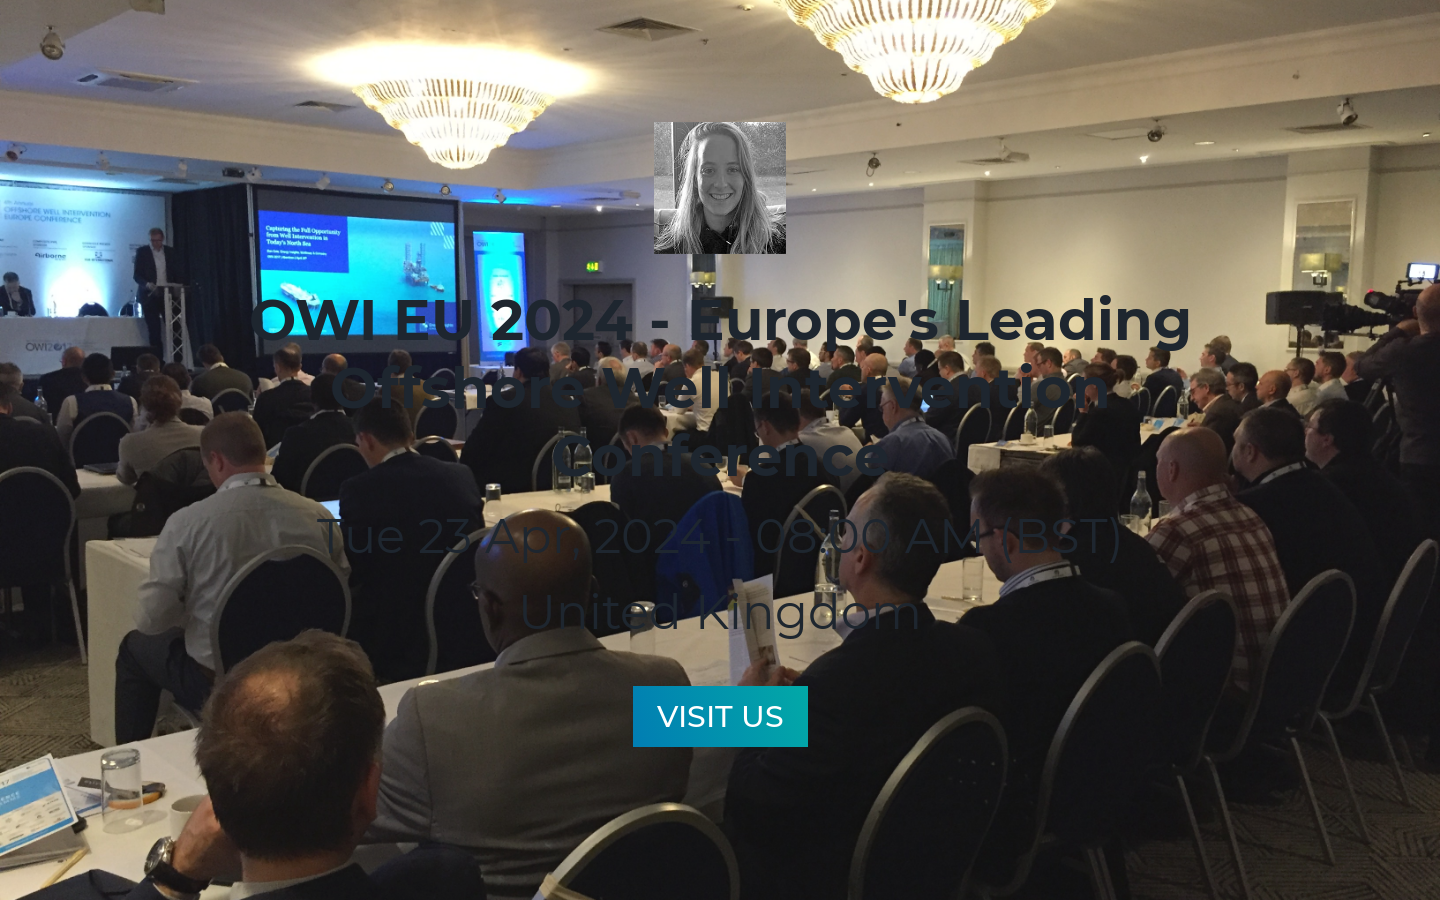 OWI EU 2024 Europe's Leading Offshore Well Intervention Conference